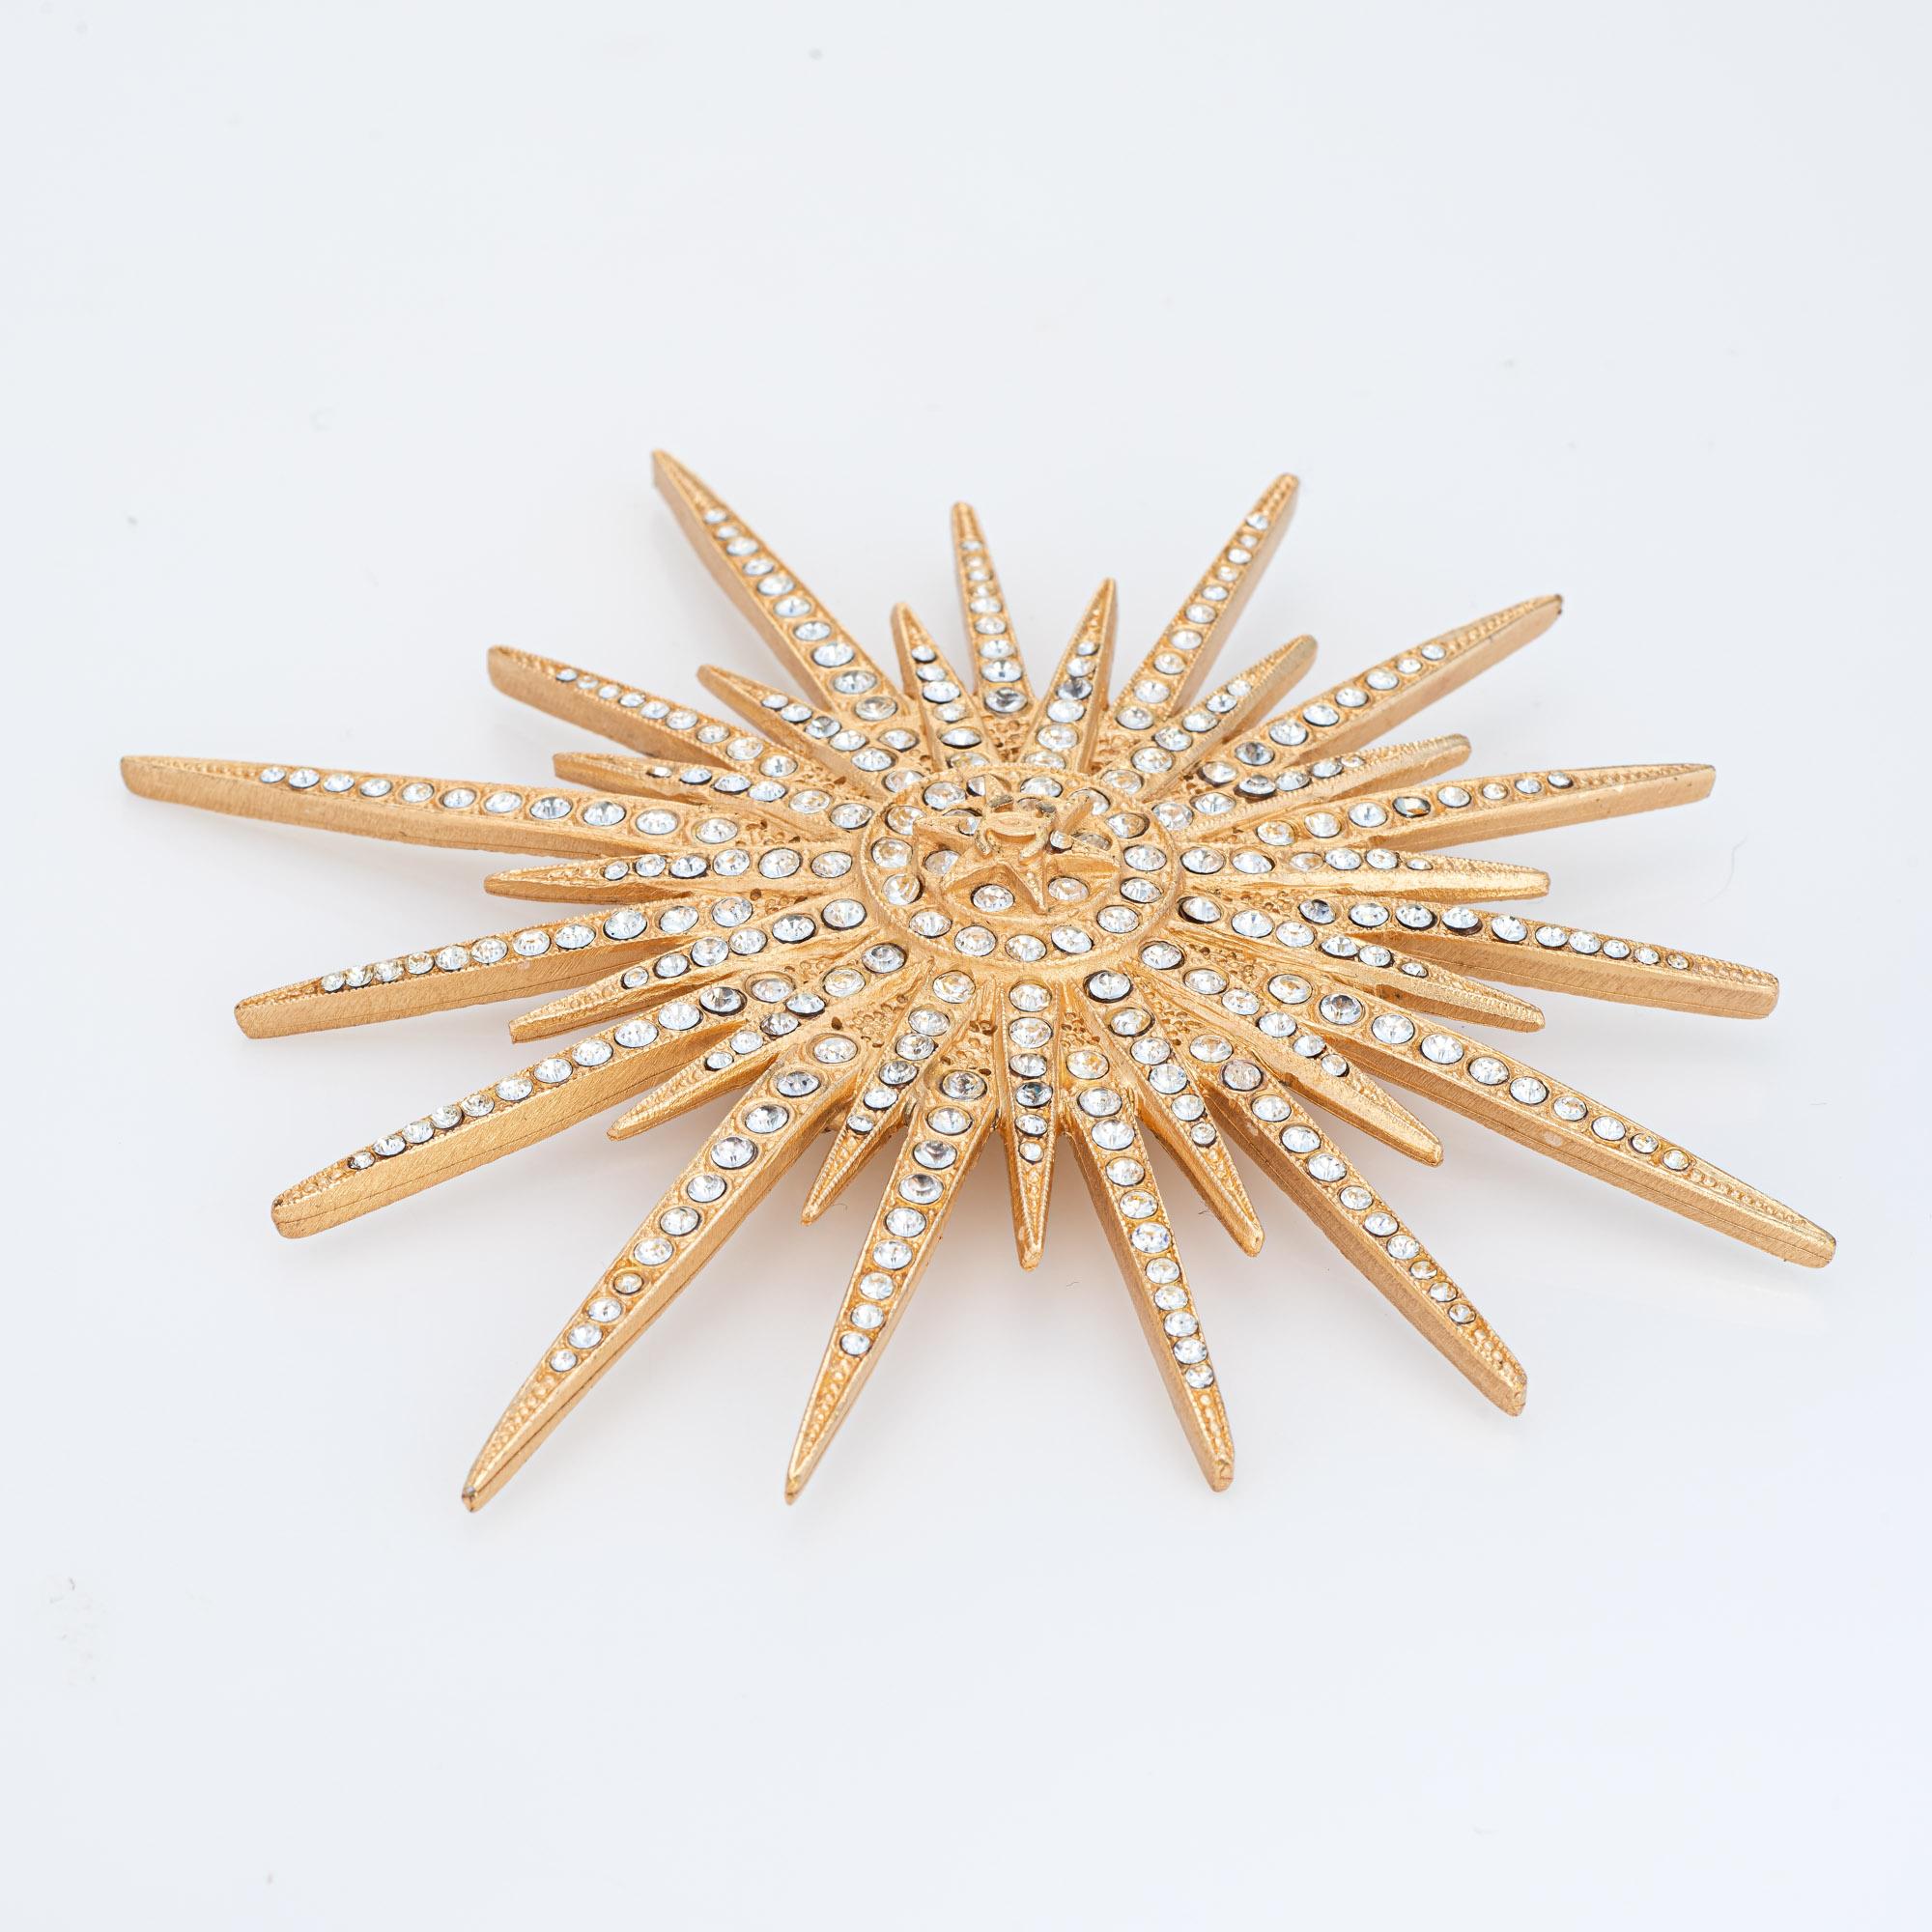 Vintage Chanel Large Starburst crystal brooch (circa 2001) crafted in yellow gold tone.

Small crystals are set into the large starburst motif. Large in scale at 3 1/2 inches in diameter, the brooch makes a great statement on a lapel, attached to a